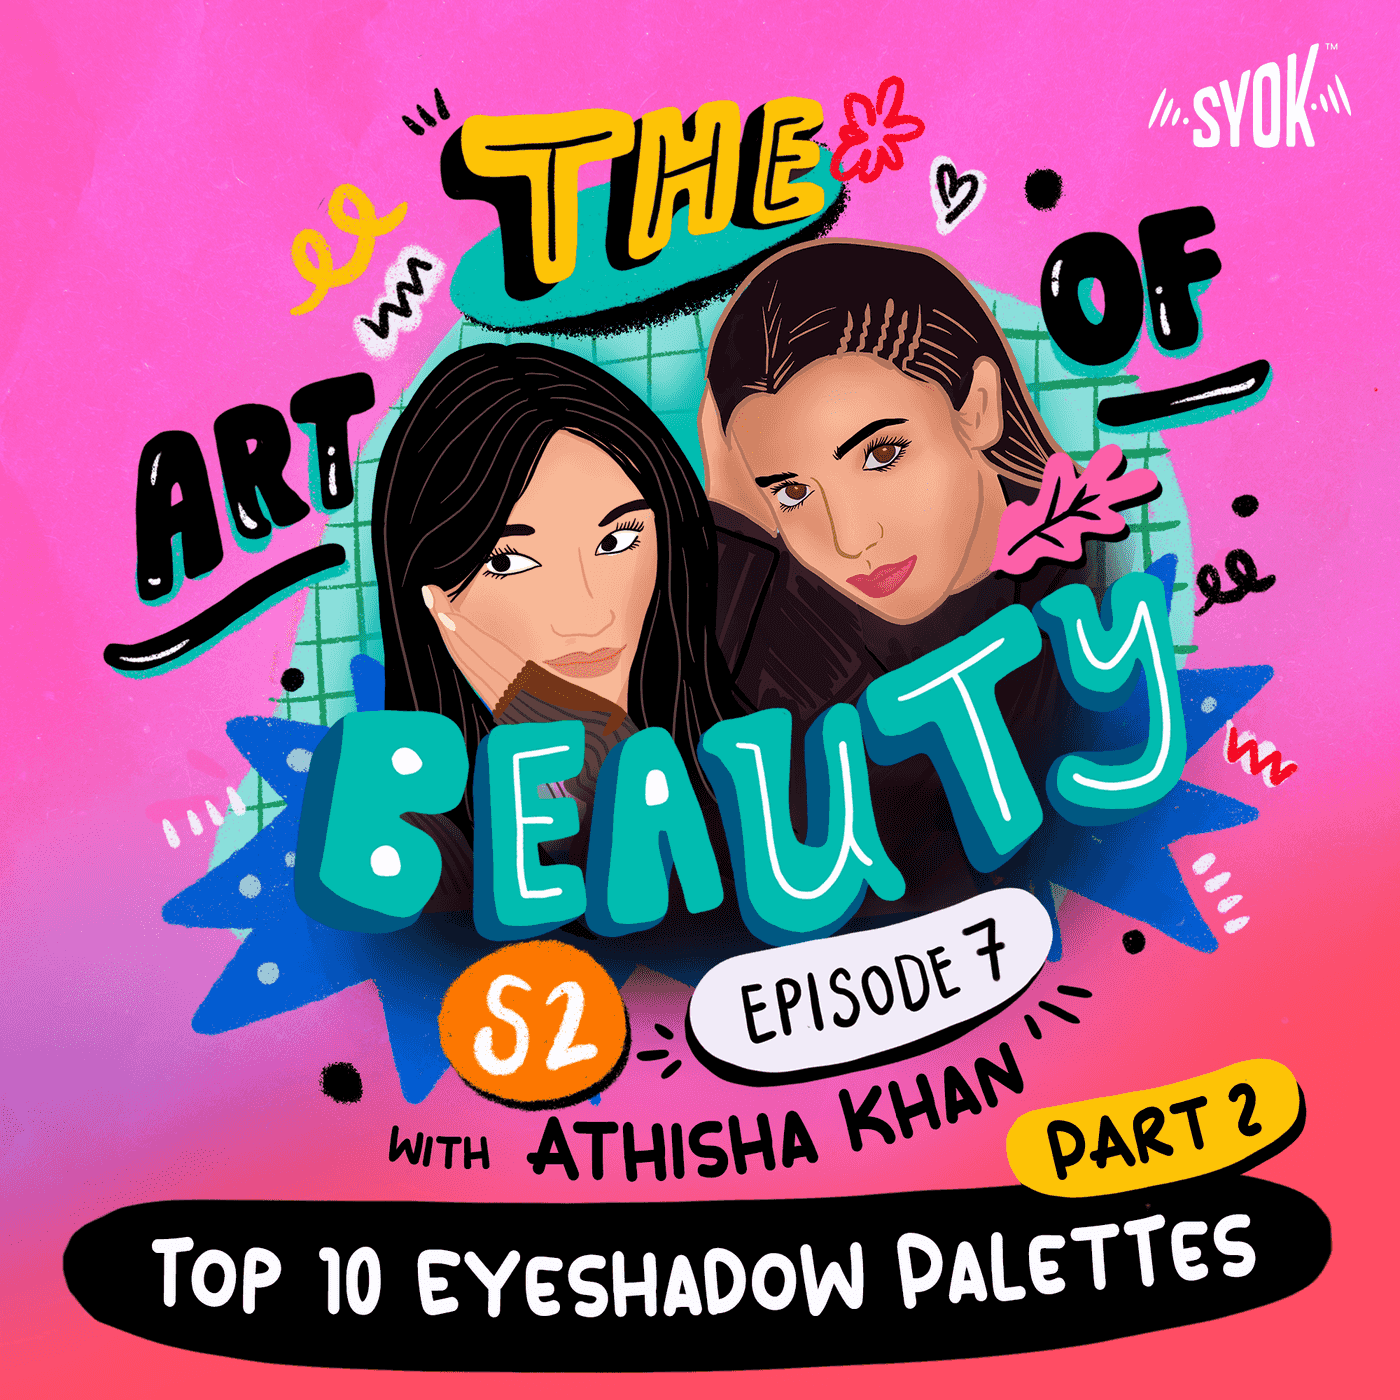 Top 10 Eyeshadow Palettes with Athisha Khan Part 2 | The Art of Beauty S2E7